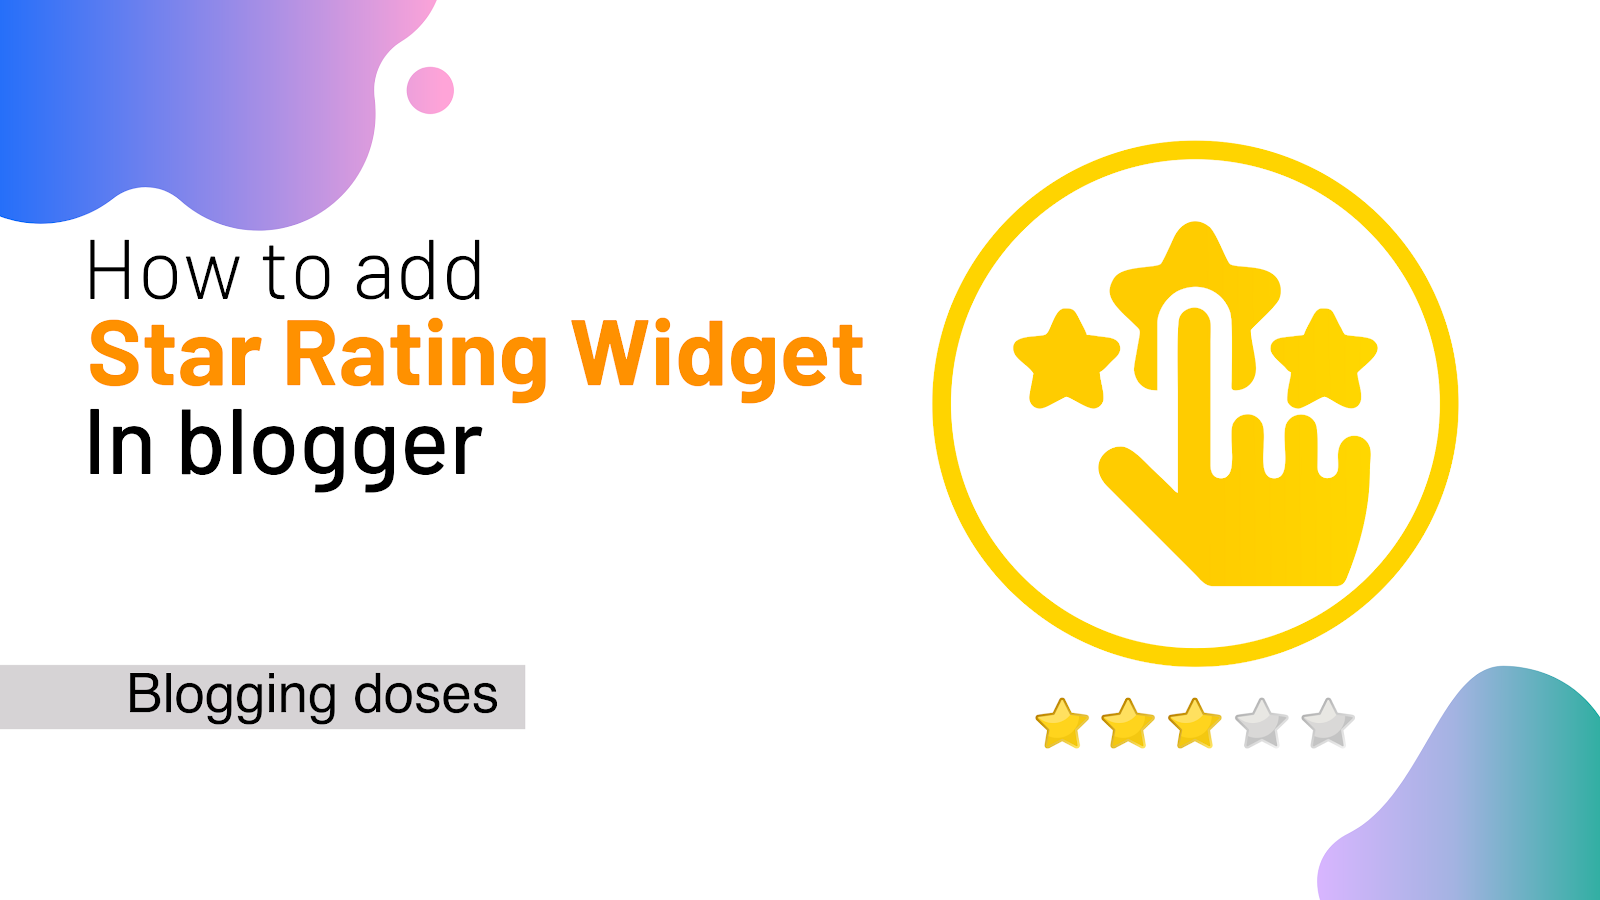 How to add star rating widget in blogger